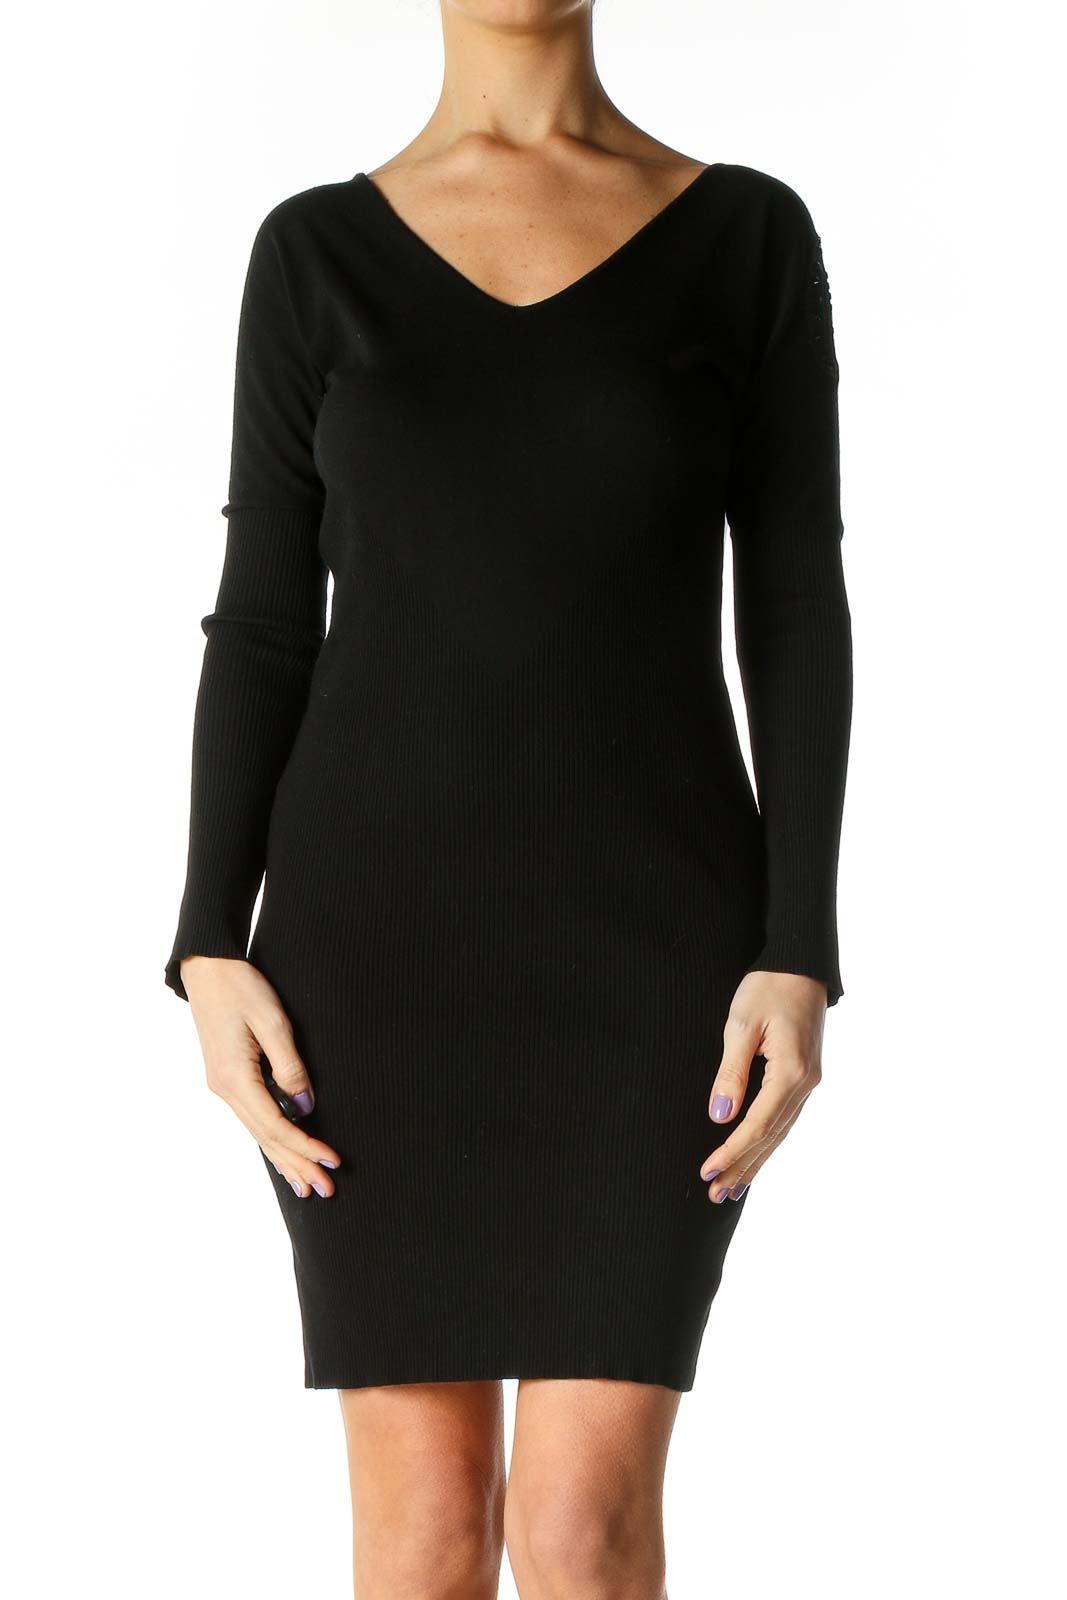 Black Solid Chic Sheath Dress Front